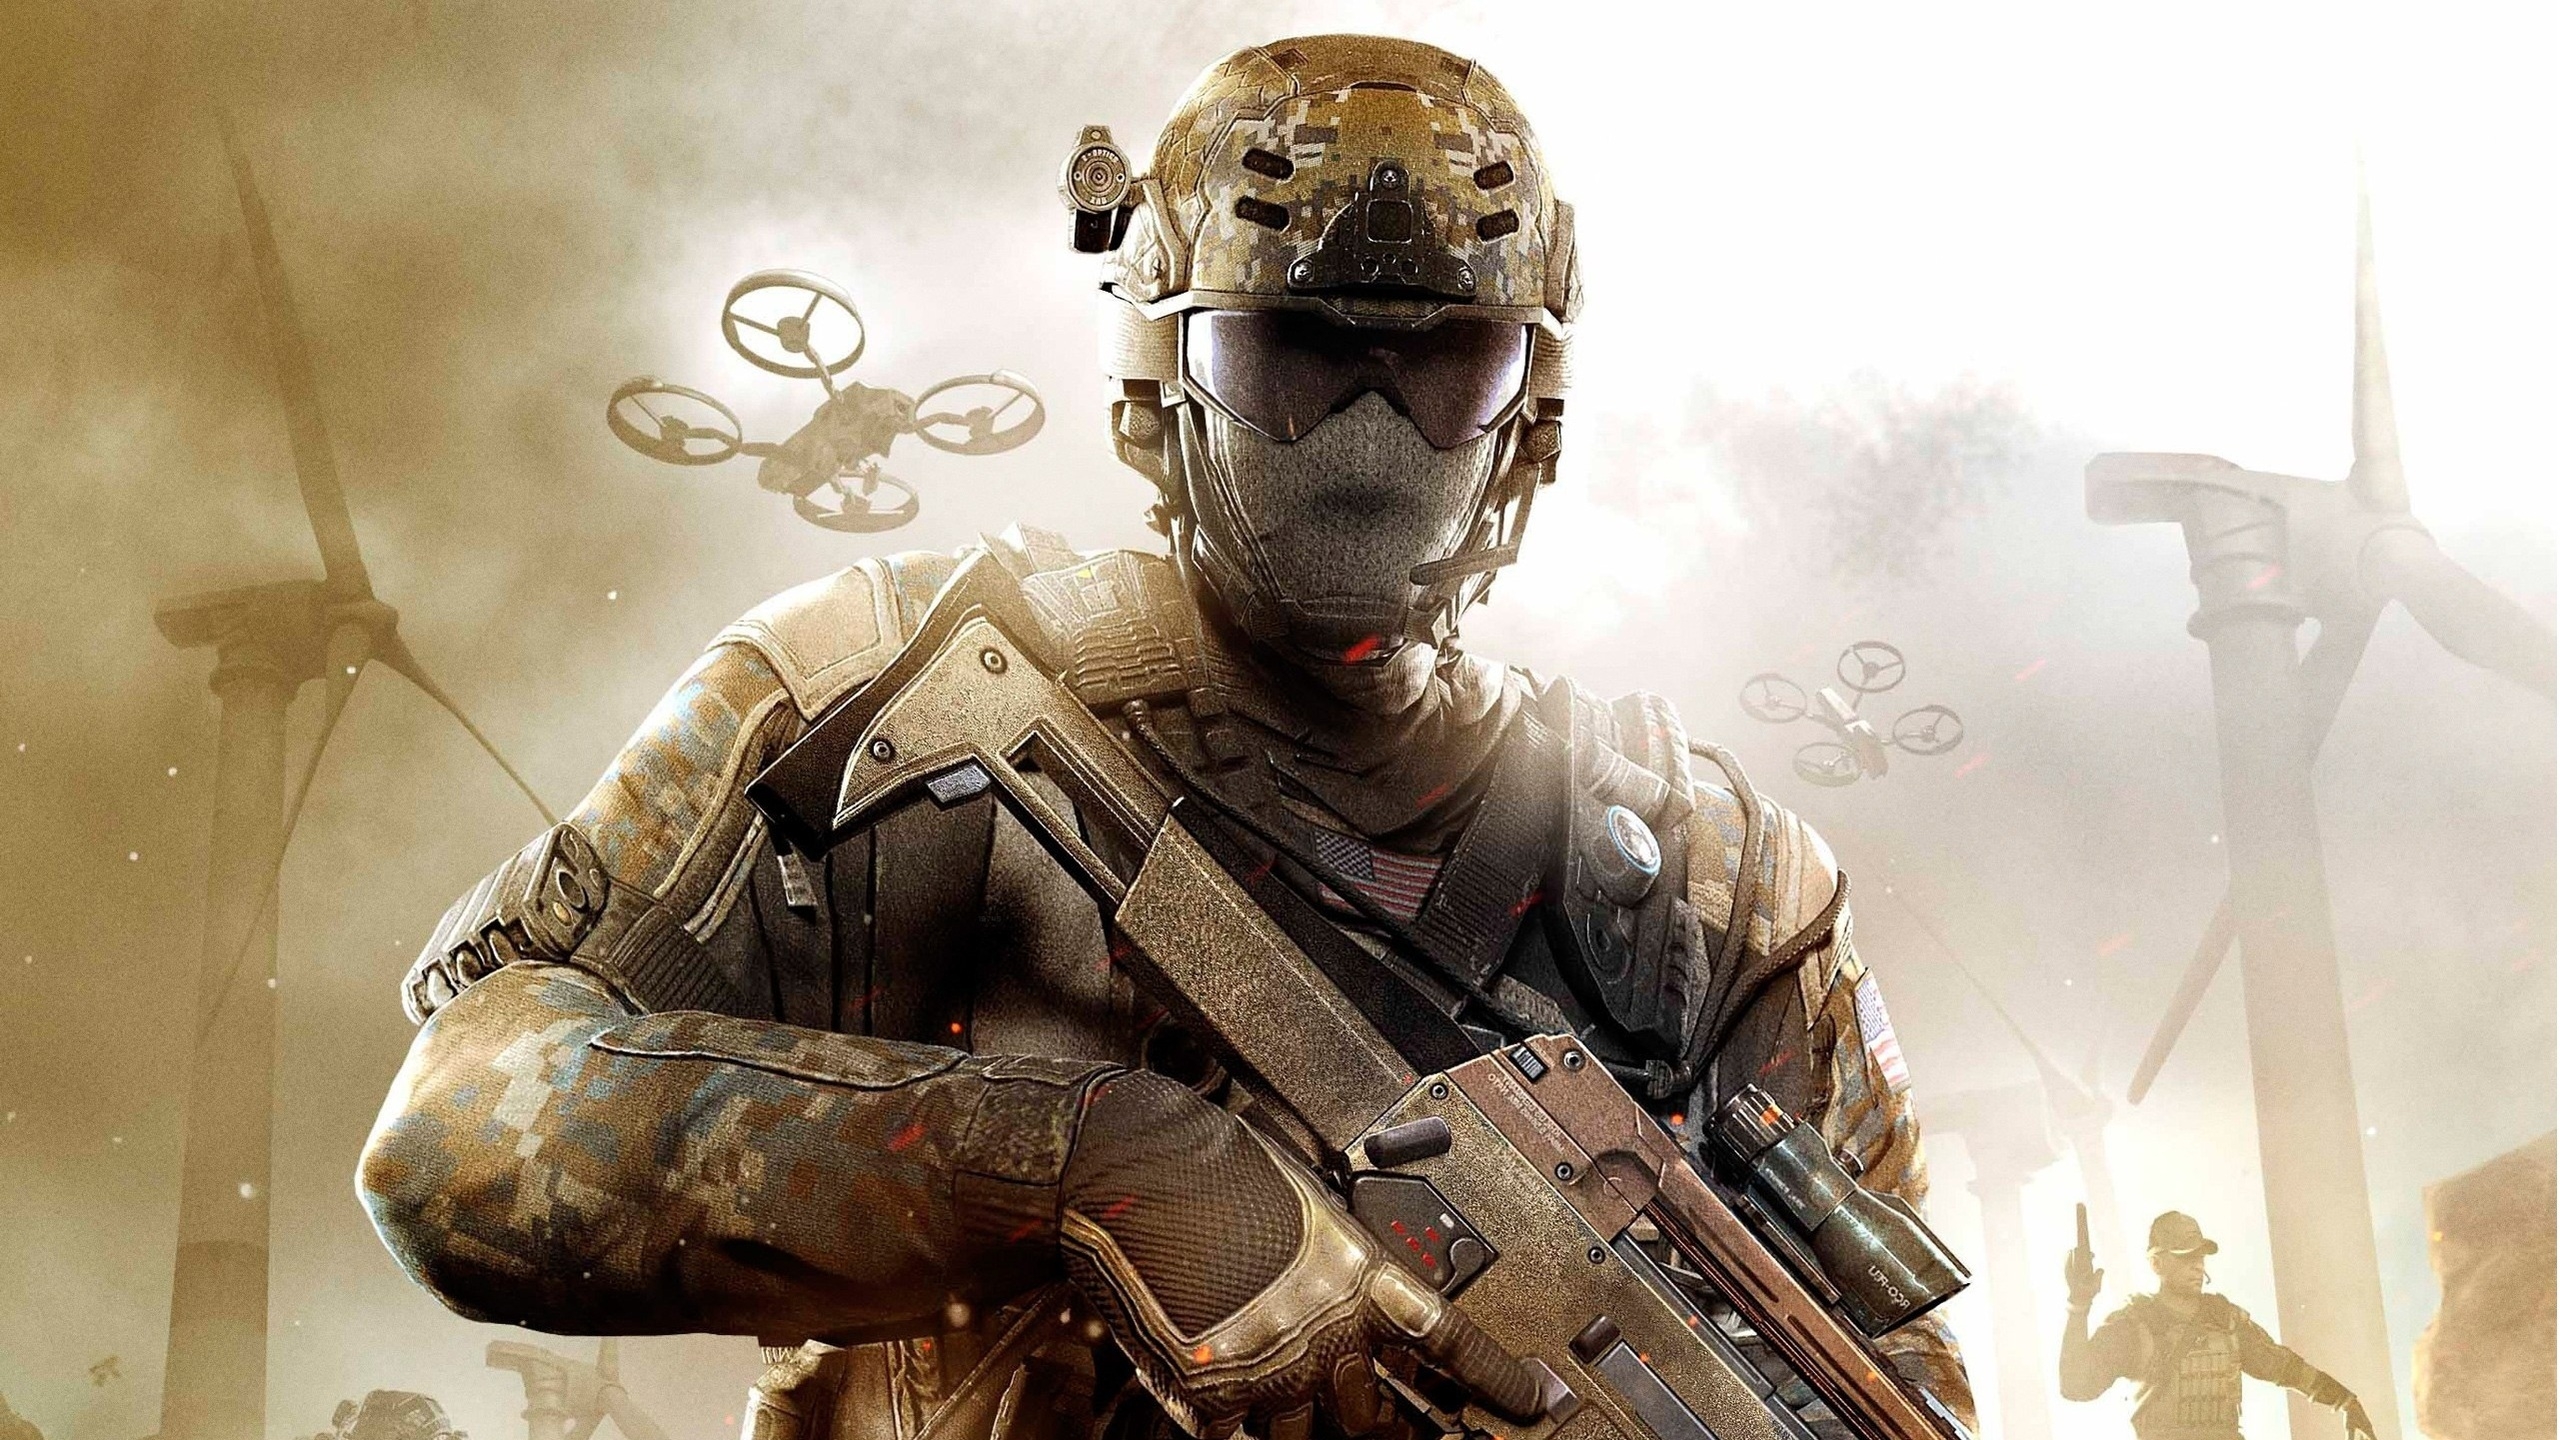 Call of Duty Black Ops 2 Soldier for 2560x1440 HDTV resolution